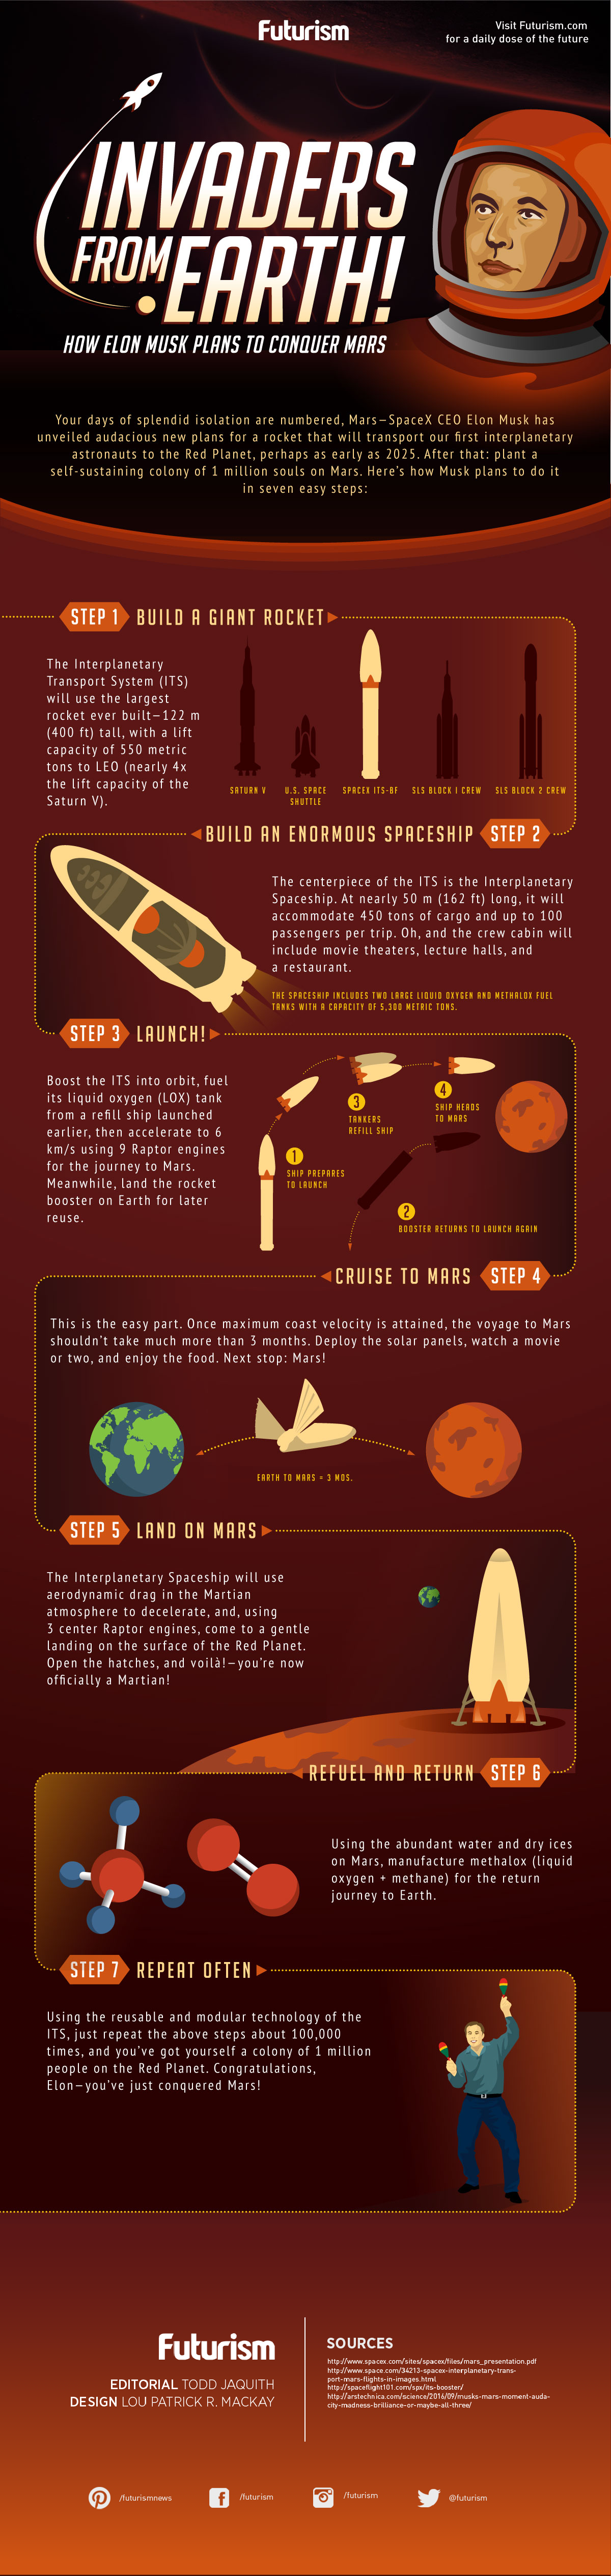 Elon Musk's Foolproof Plan To Conquer Mars - Infographic